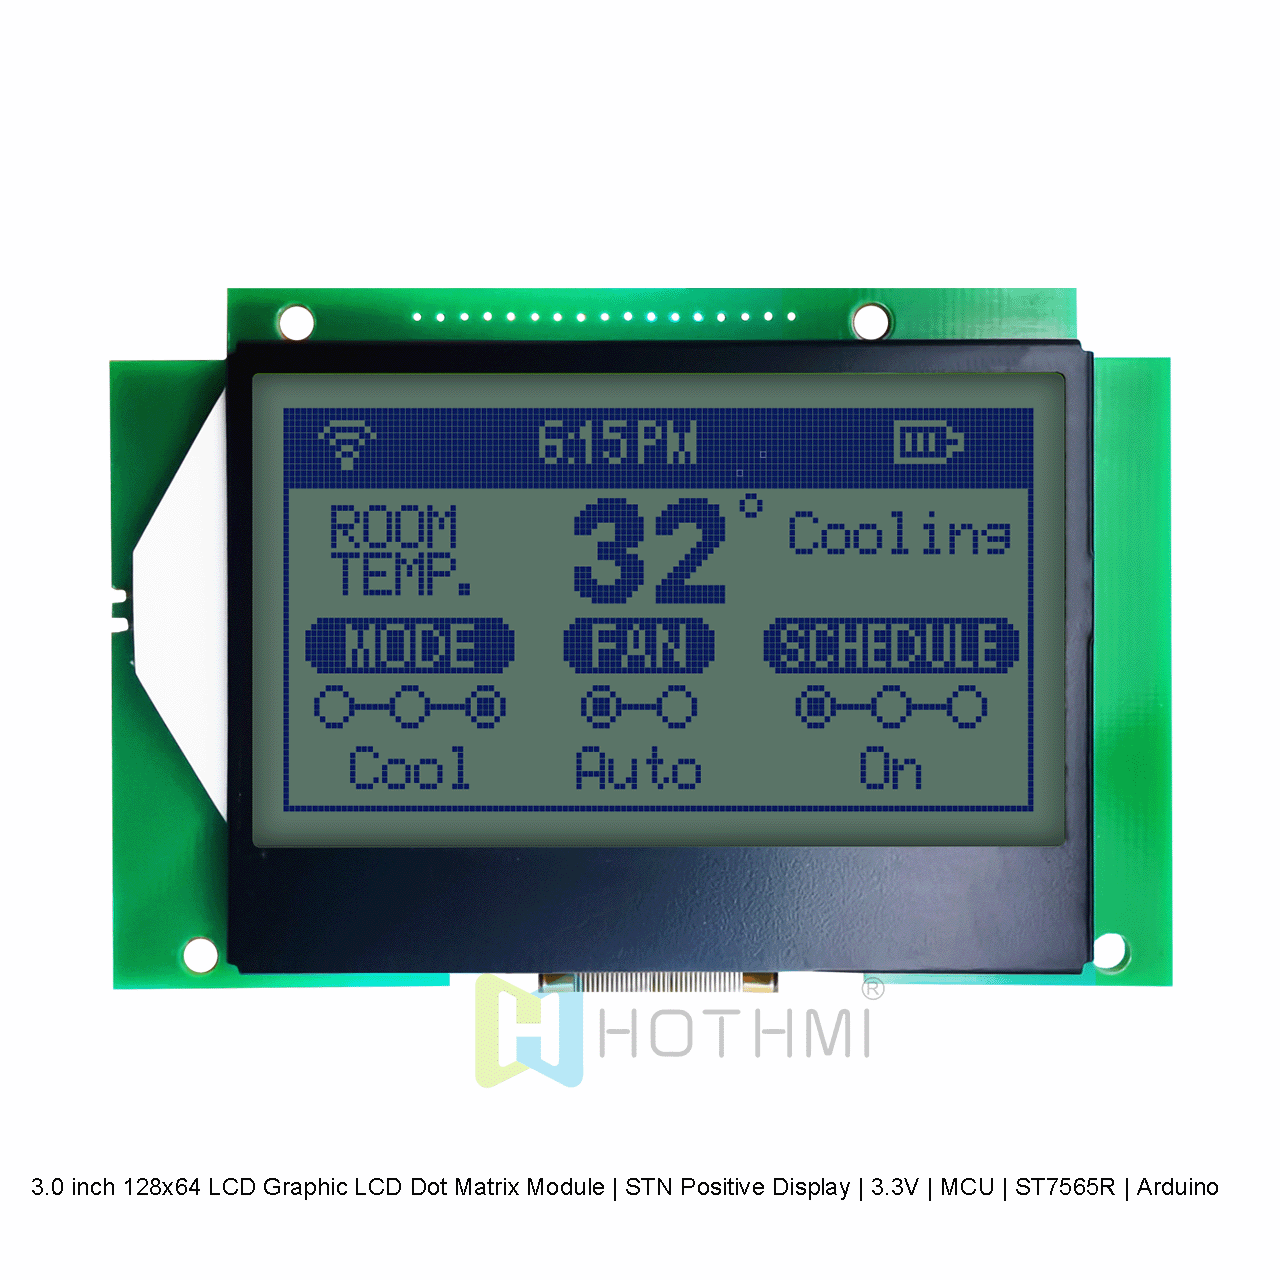 3.0 inch 128x64 LCD Graphic LCD Dot Matrix Module | STN Positive Display | 3.3V | MCU | ST7565R | Arduino | Gray Background Blue Text